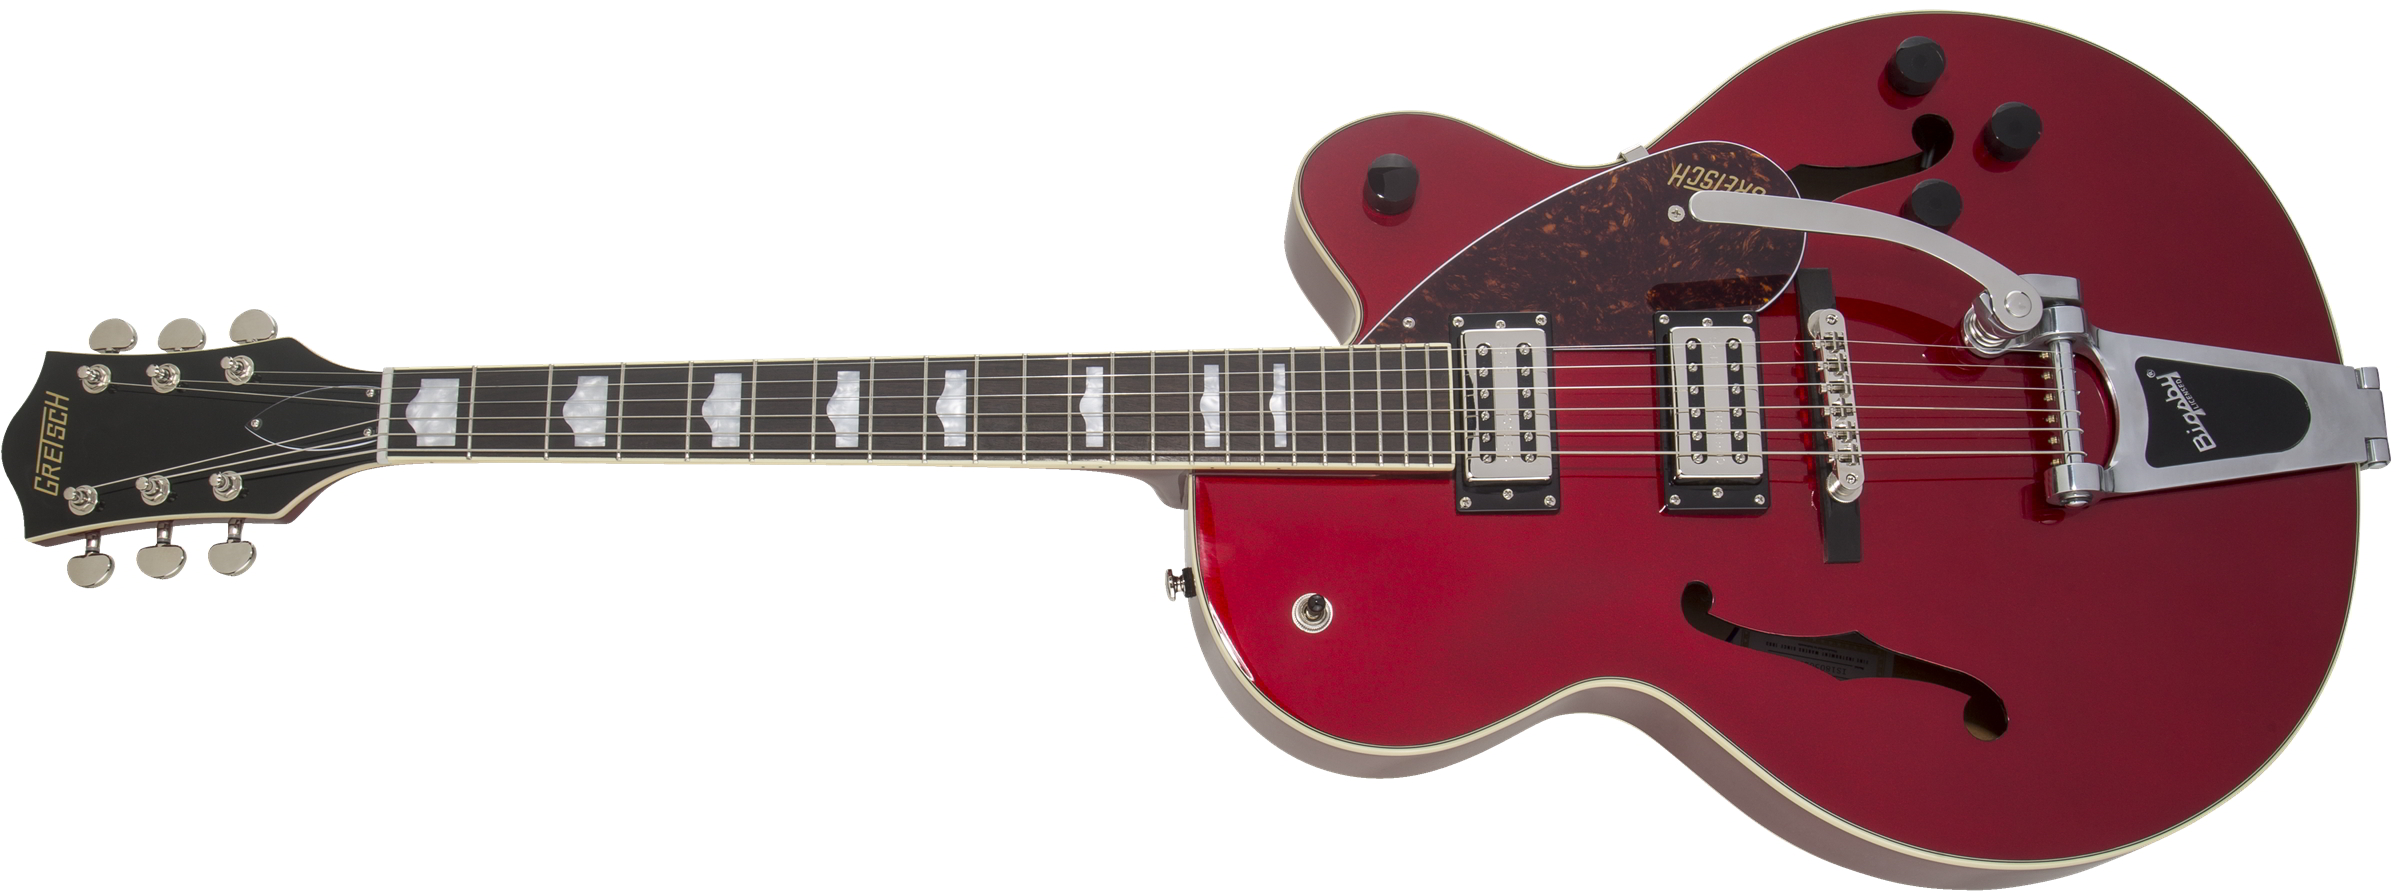 G2420T Streamliner Hollow Body with Bigsby, Laurel Fingerboard, Broad'Tron BT-2S Pickups, Candy Apple Red追加画像